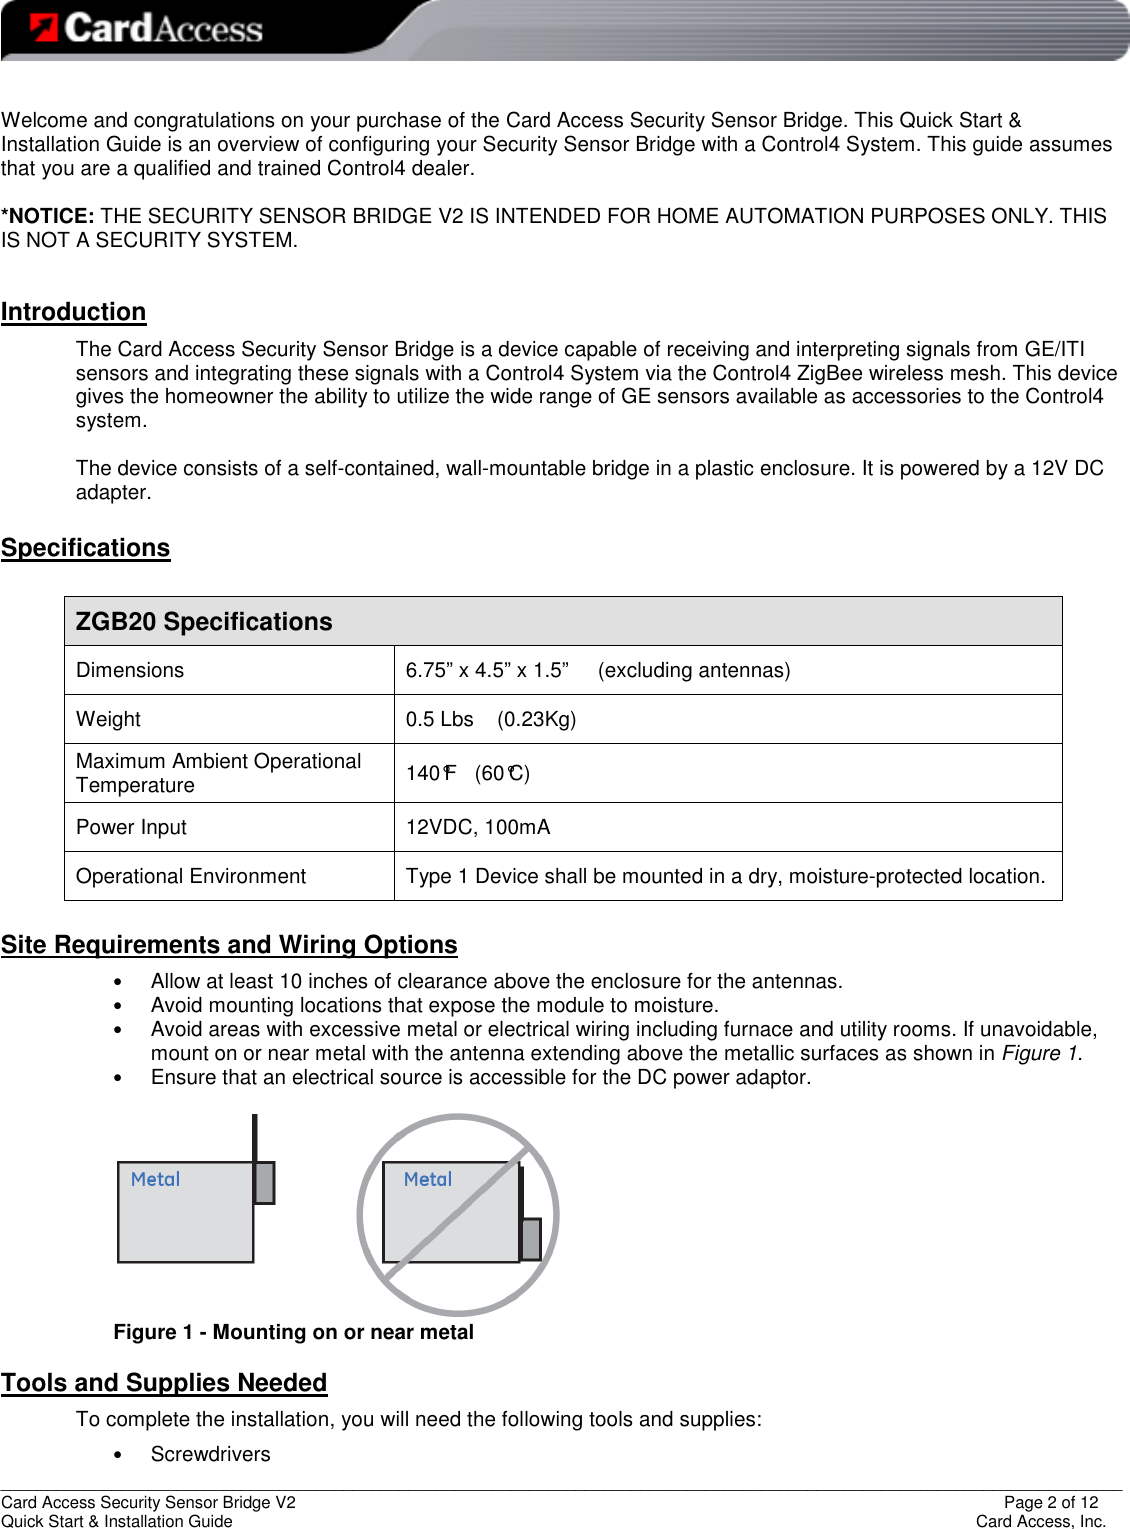   _________________________________________________________________________________________________________________________ Card Access Security Sensor Bridge V2                  Page 2 of 12 Quick Start &amp; Installation Guide      Card Access, Inc.  Welcome and congratulations on your purchase of the Card Access Security Sensor Bridge. This Quick Start &amp; Installation Guide is an overview of configuring your Security Sensor Bridge with a Control4 System. This guide assumes that you are a qualified and trained Control4 dealer.   *NOTICE: THE SECURITY SENSOR BRIDGE V2 IS INTENDED FOR HOME AUTOMATION PURPOSES ONLY. THIS IS NOT A SECURITY SYSTEM.   Introduction The Card Access Security Sensor Bridge is a device capable of receiving and interpreting signals from GE/ITI sensors and integrating these signals with a Control4 System via the Control4 ZigBee wireless mesh. This device gives the homeowner the ability to utilize the wide range of GE sensors available as accessories to the Control4 system.  The device consists of a self-contained, wall-mountable bridge in a plastic enclosure. It is powered by a 12V DC adapter.  Specifications  ZGB20 Specifications Dimensions  6.75” x 4.5” x 1.5”     (excluding antennas) Weight  0.5 Lbs    (0.23Kg) Maximum Ambient Operational Temperature  140°F   (60°C) Power Input  12VDC, 100mA Operational Environment  Type 1 Device shall be mounted in a dry, moisture-protected location.  Site Requirements and Wiring Options • Allow at least 10 inches of clearance above the enclosure for the antennas.  • Avoid mounting locations that expose the module to moisture. • Avoid areas with excessive metal or electrical wiring including furnace and utility rooms. If unavoidable, mount on or near metal with the antenna extending above the metallic surfaces as shown in Figure 1. • Ensure that an electrical source is accessible for the DC power adaptor.    Figure 1 - Mounting on or near metal  Tools and Supplies Needed  To complete the installation, you will need the following tools and supplies: • Screwdrivers 